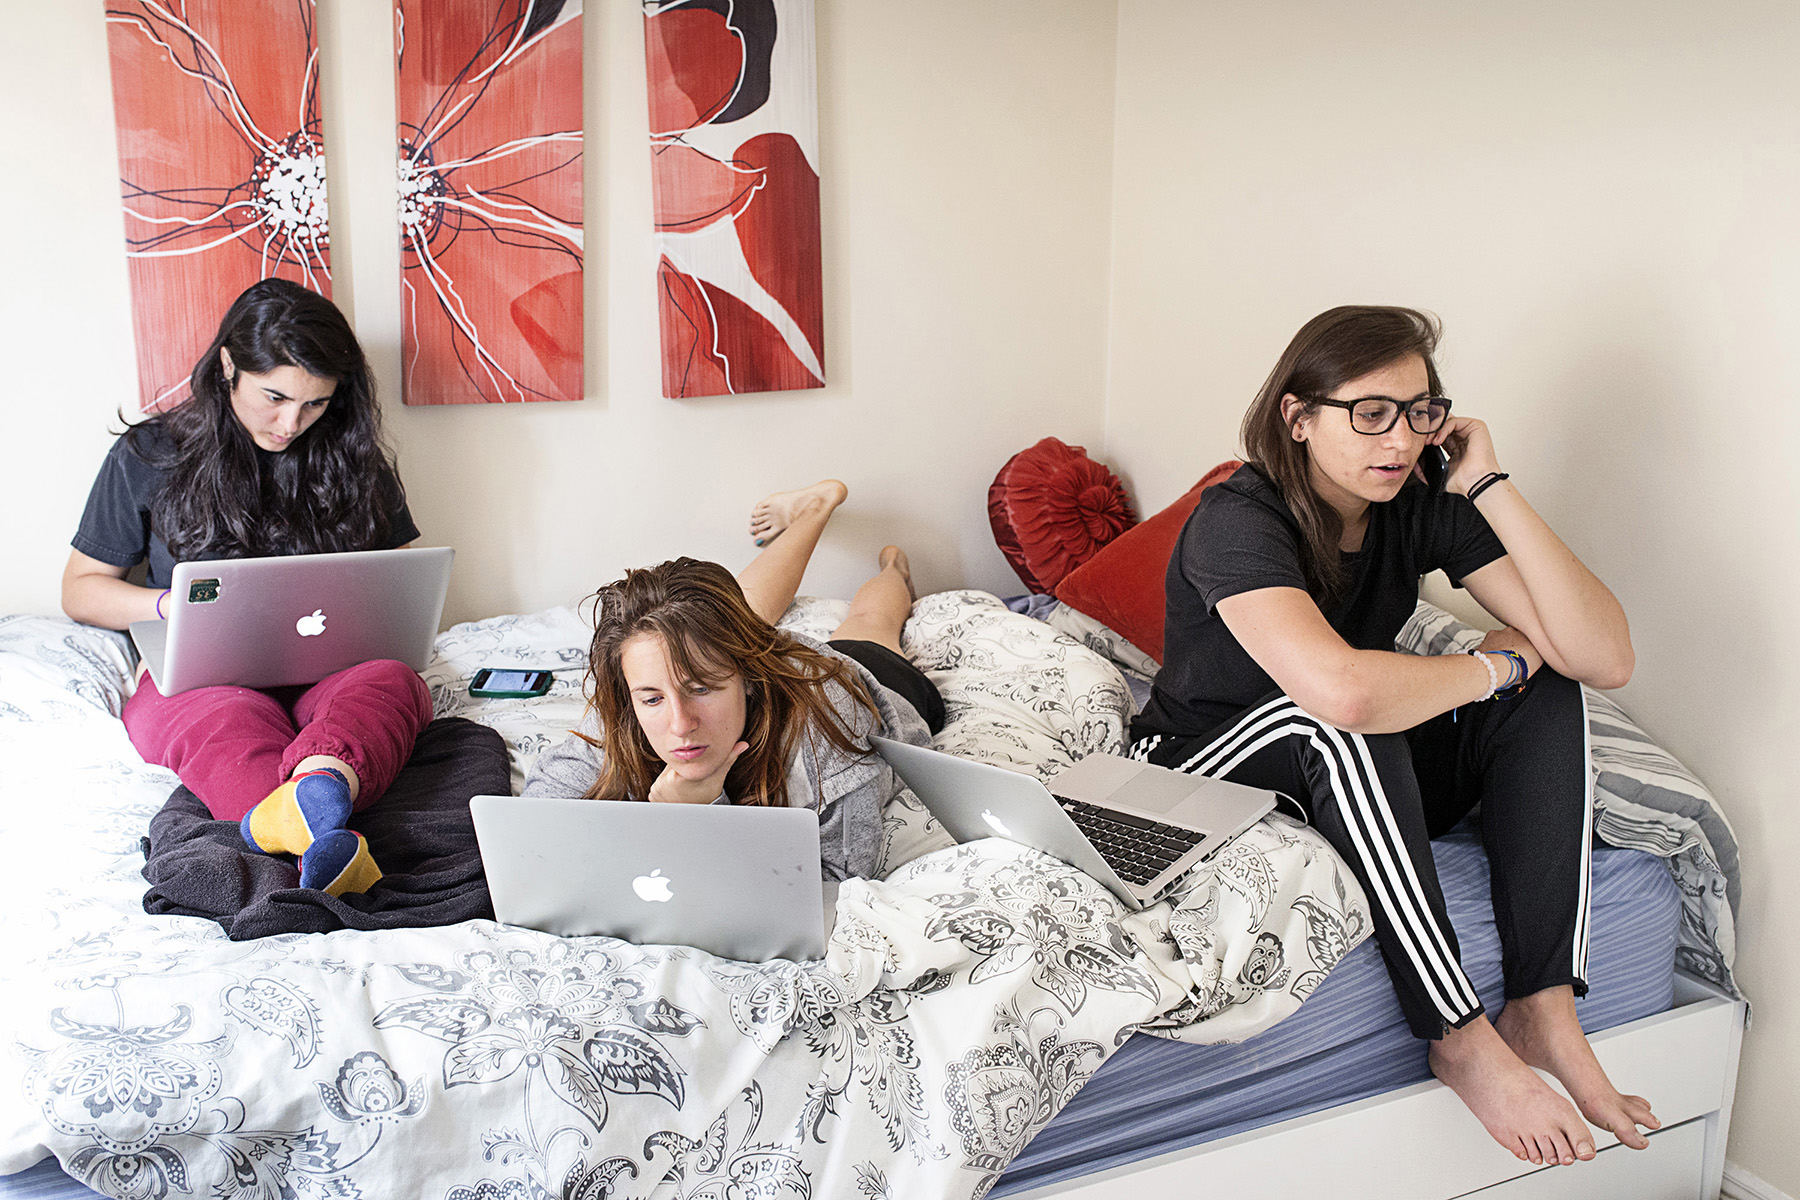 Sandy Frank, Mackenzie Hughes and Danielle Gaglioti, seen left to right, work on a start-up called Akimbo inside the apartment that Hughes and Gaglioti were subletting in San Francisco, California in August 2014. The company, described as a career development platform,is based in New York, but Hughes and Gaglioti were in town for the summer to participate in Tumml, an urban ventures accelerator program. Frank joined them as an intern. They often worked from home depending on their meeting schedule and available transportation options. 